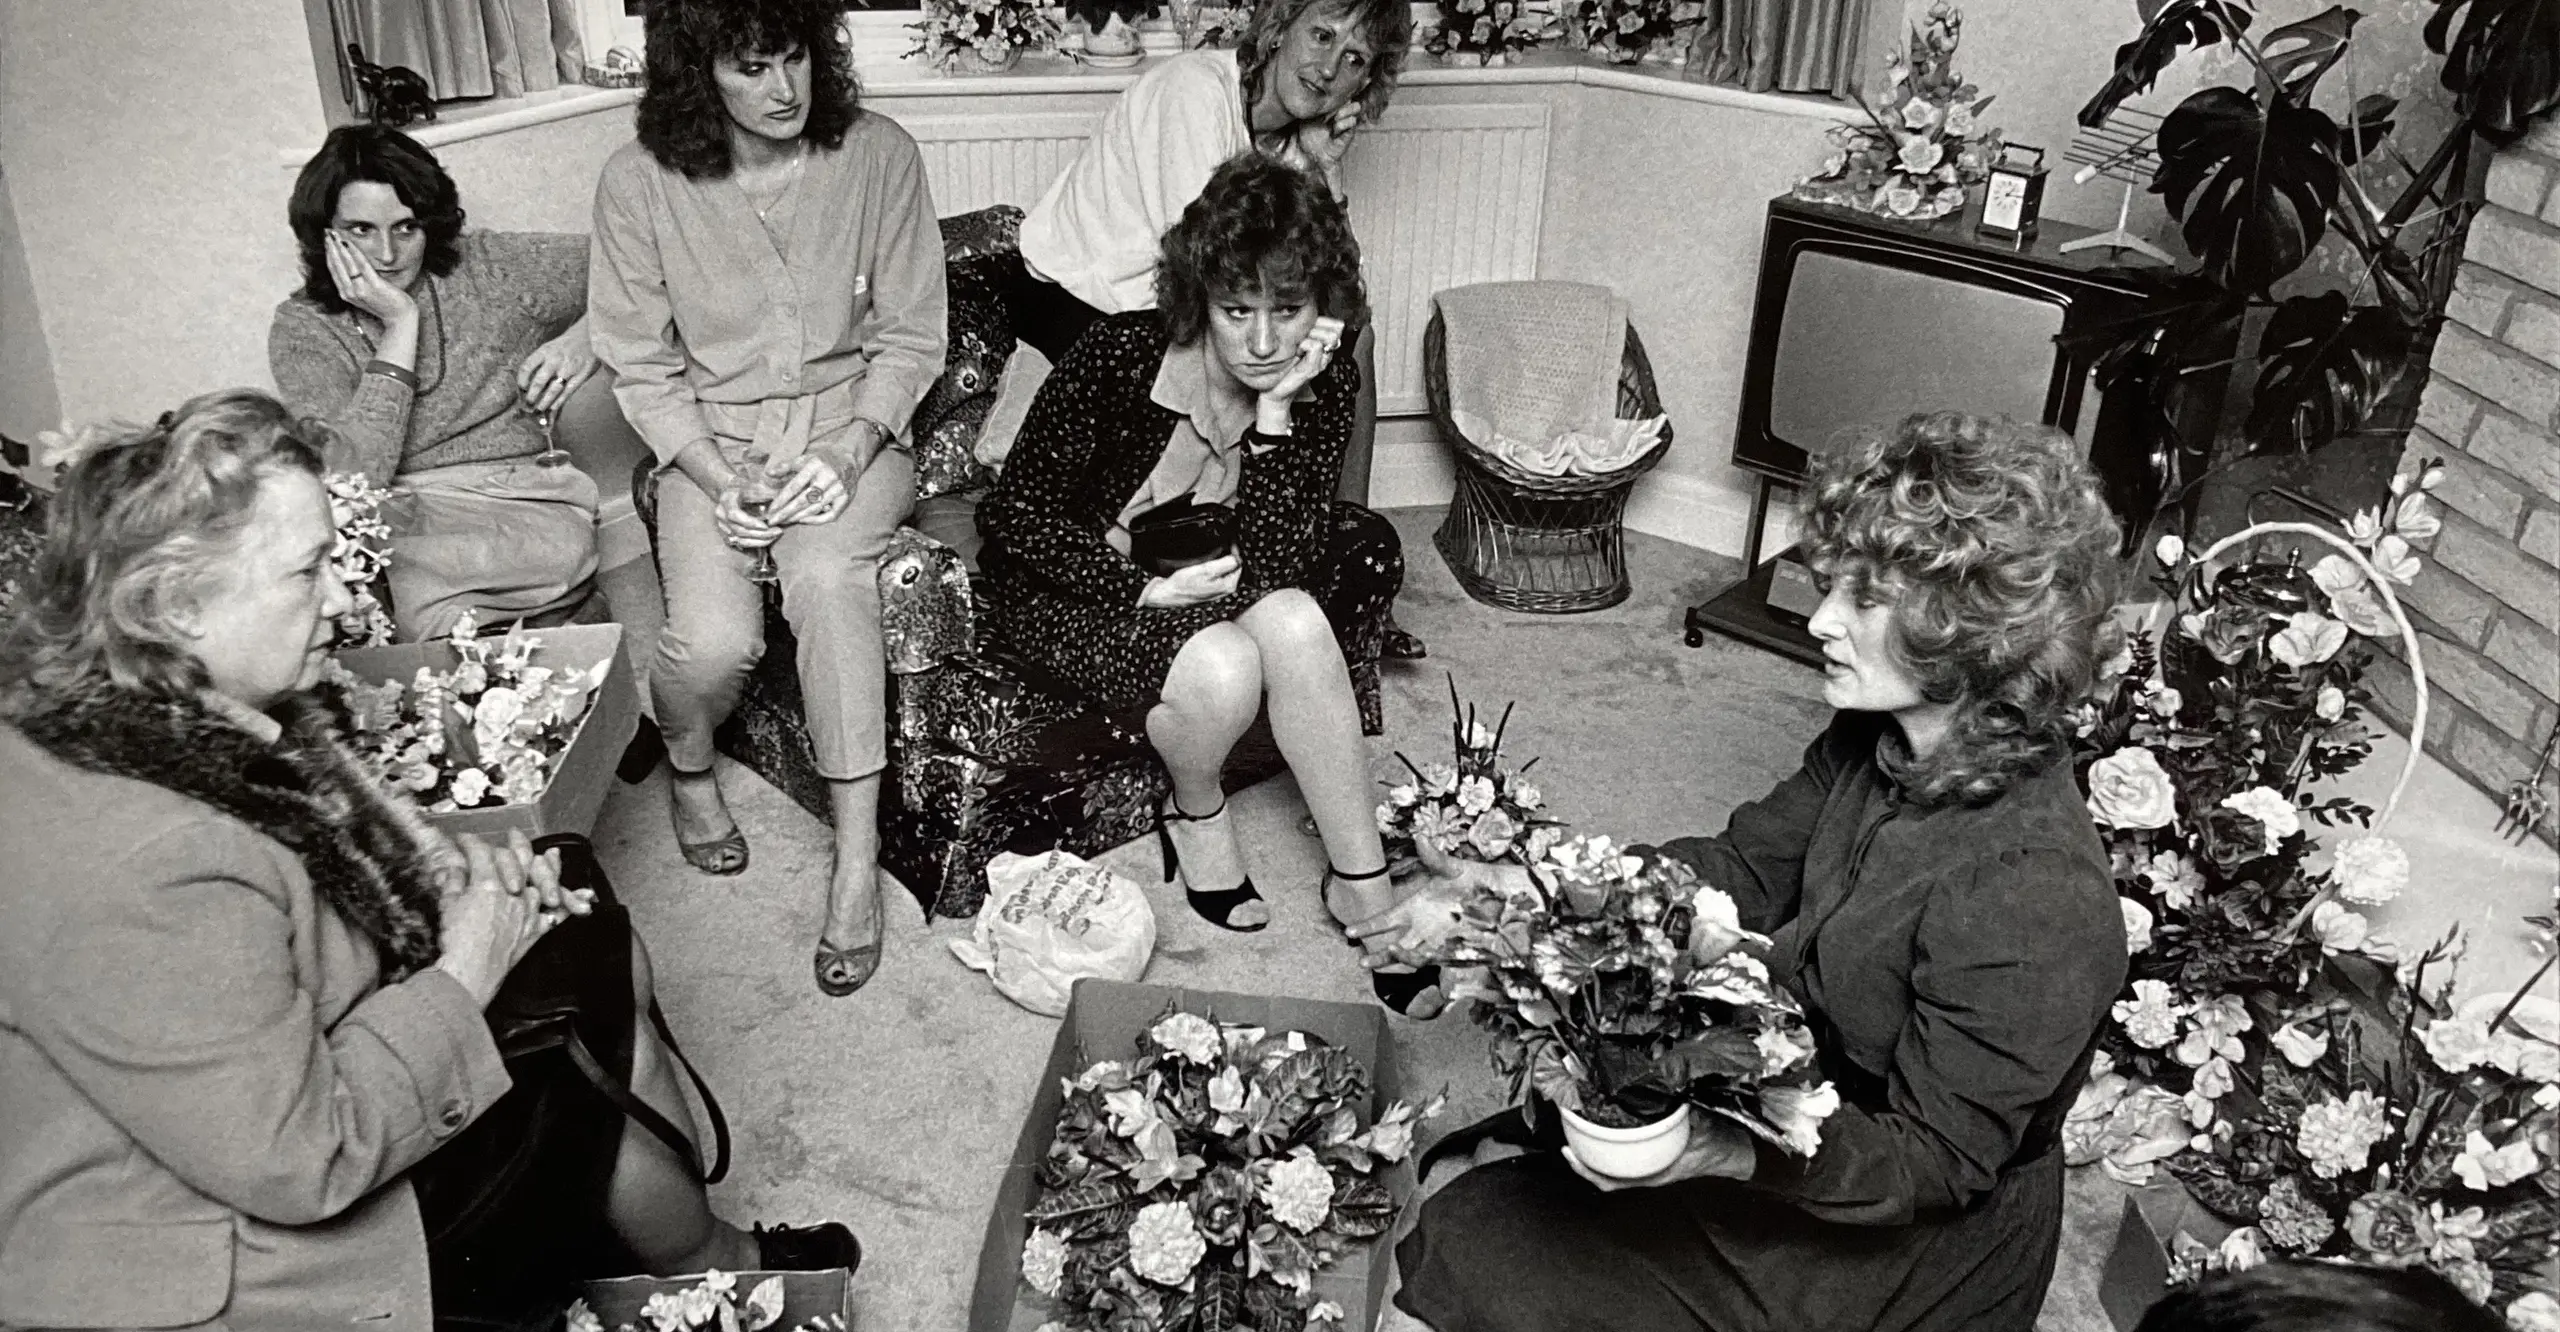 Women in a suburban living room discussing silk flower arranging